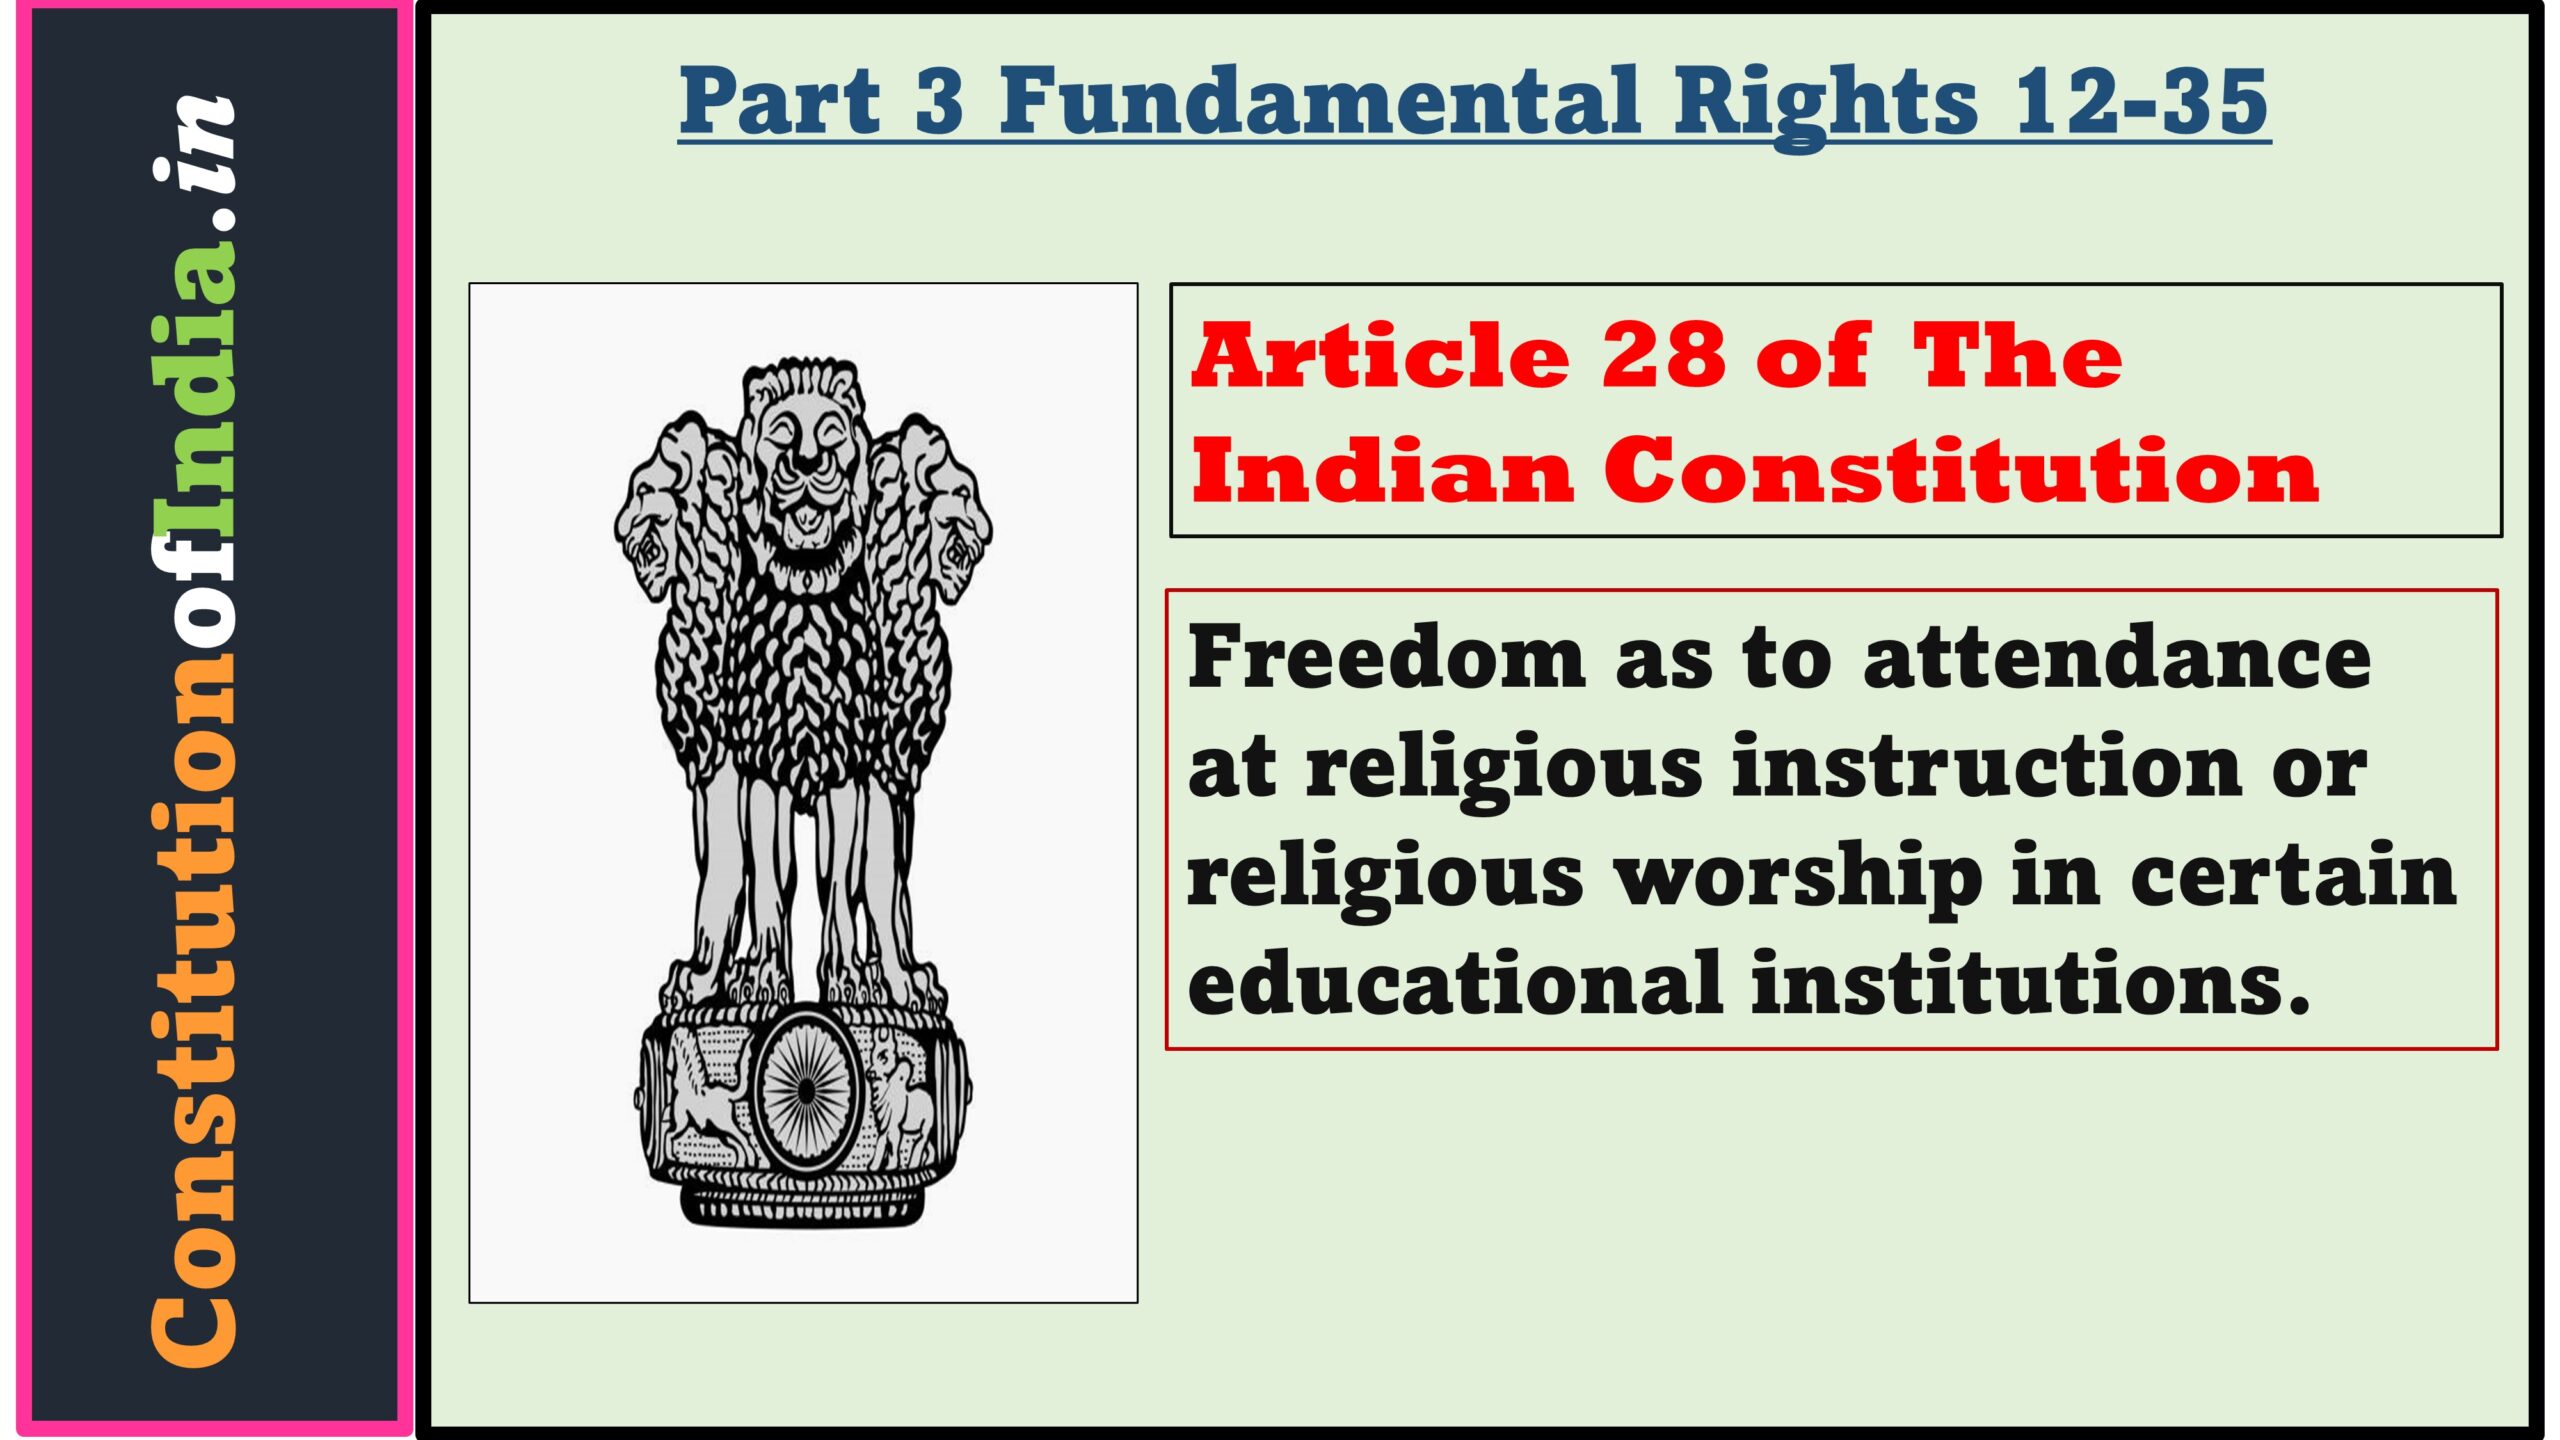 Article 28 of Indian Constitution: Freedom as to attendance at religious instruction or religious worship in certain educational institutions.